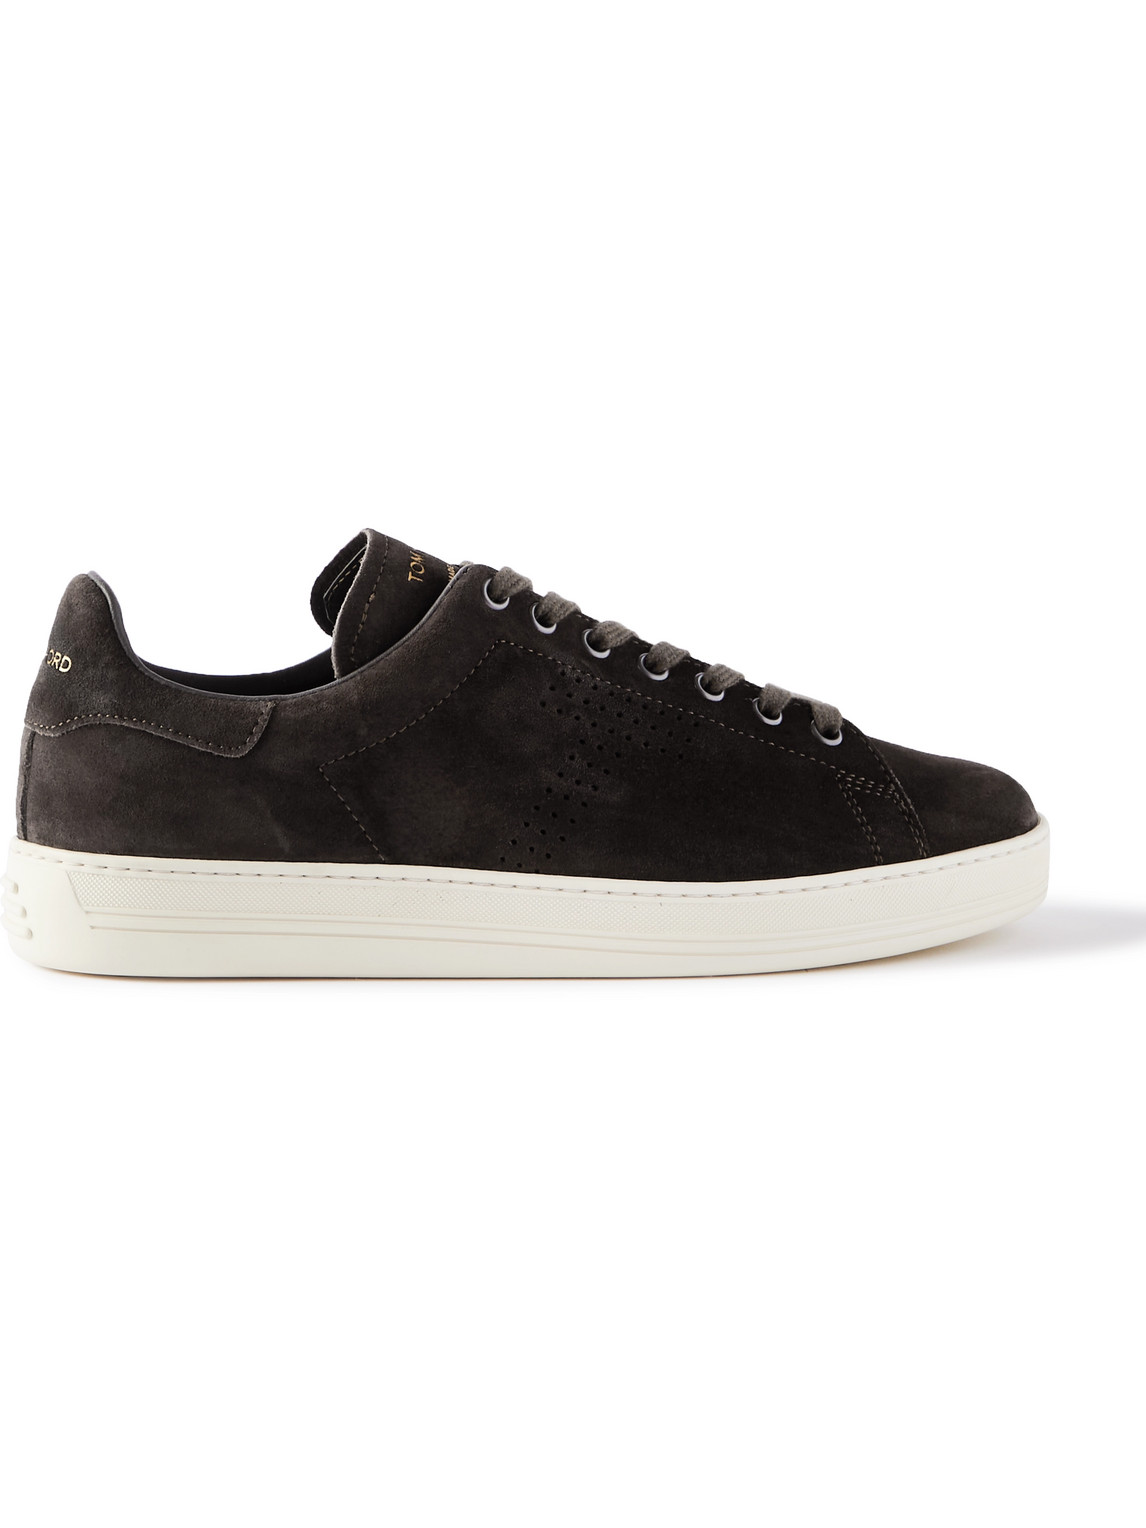 TOM FORD WARWICK PERFORATED SUEDE SNEAKERS